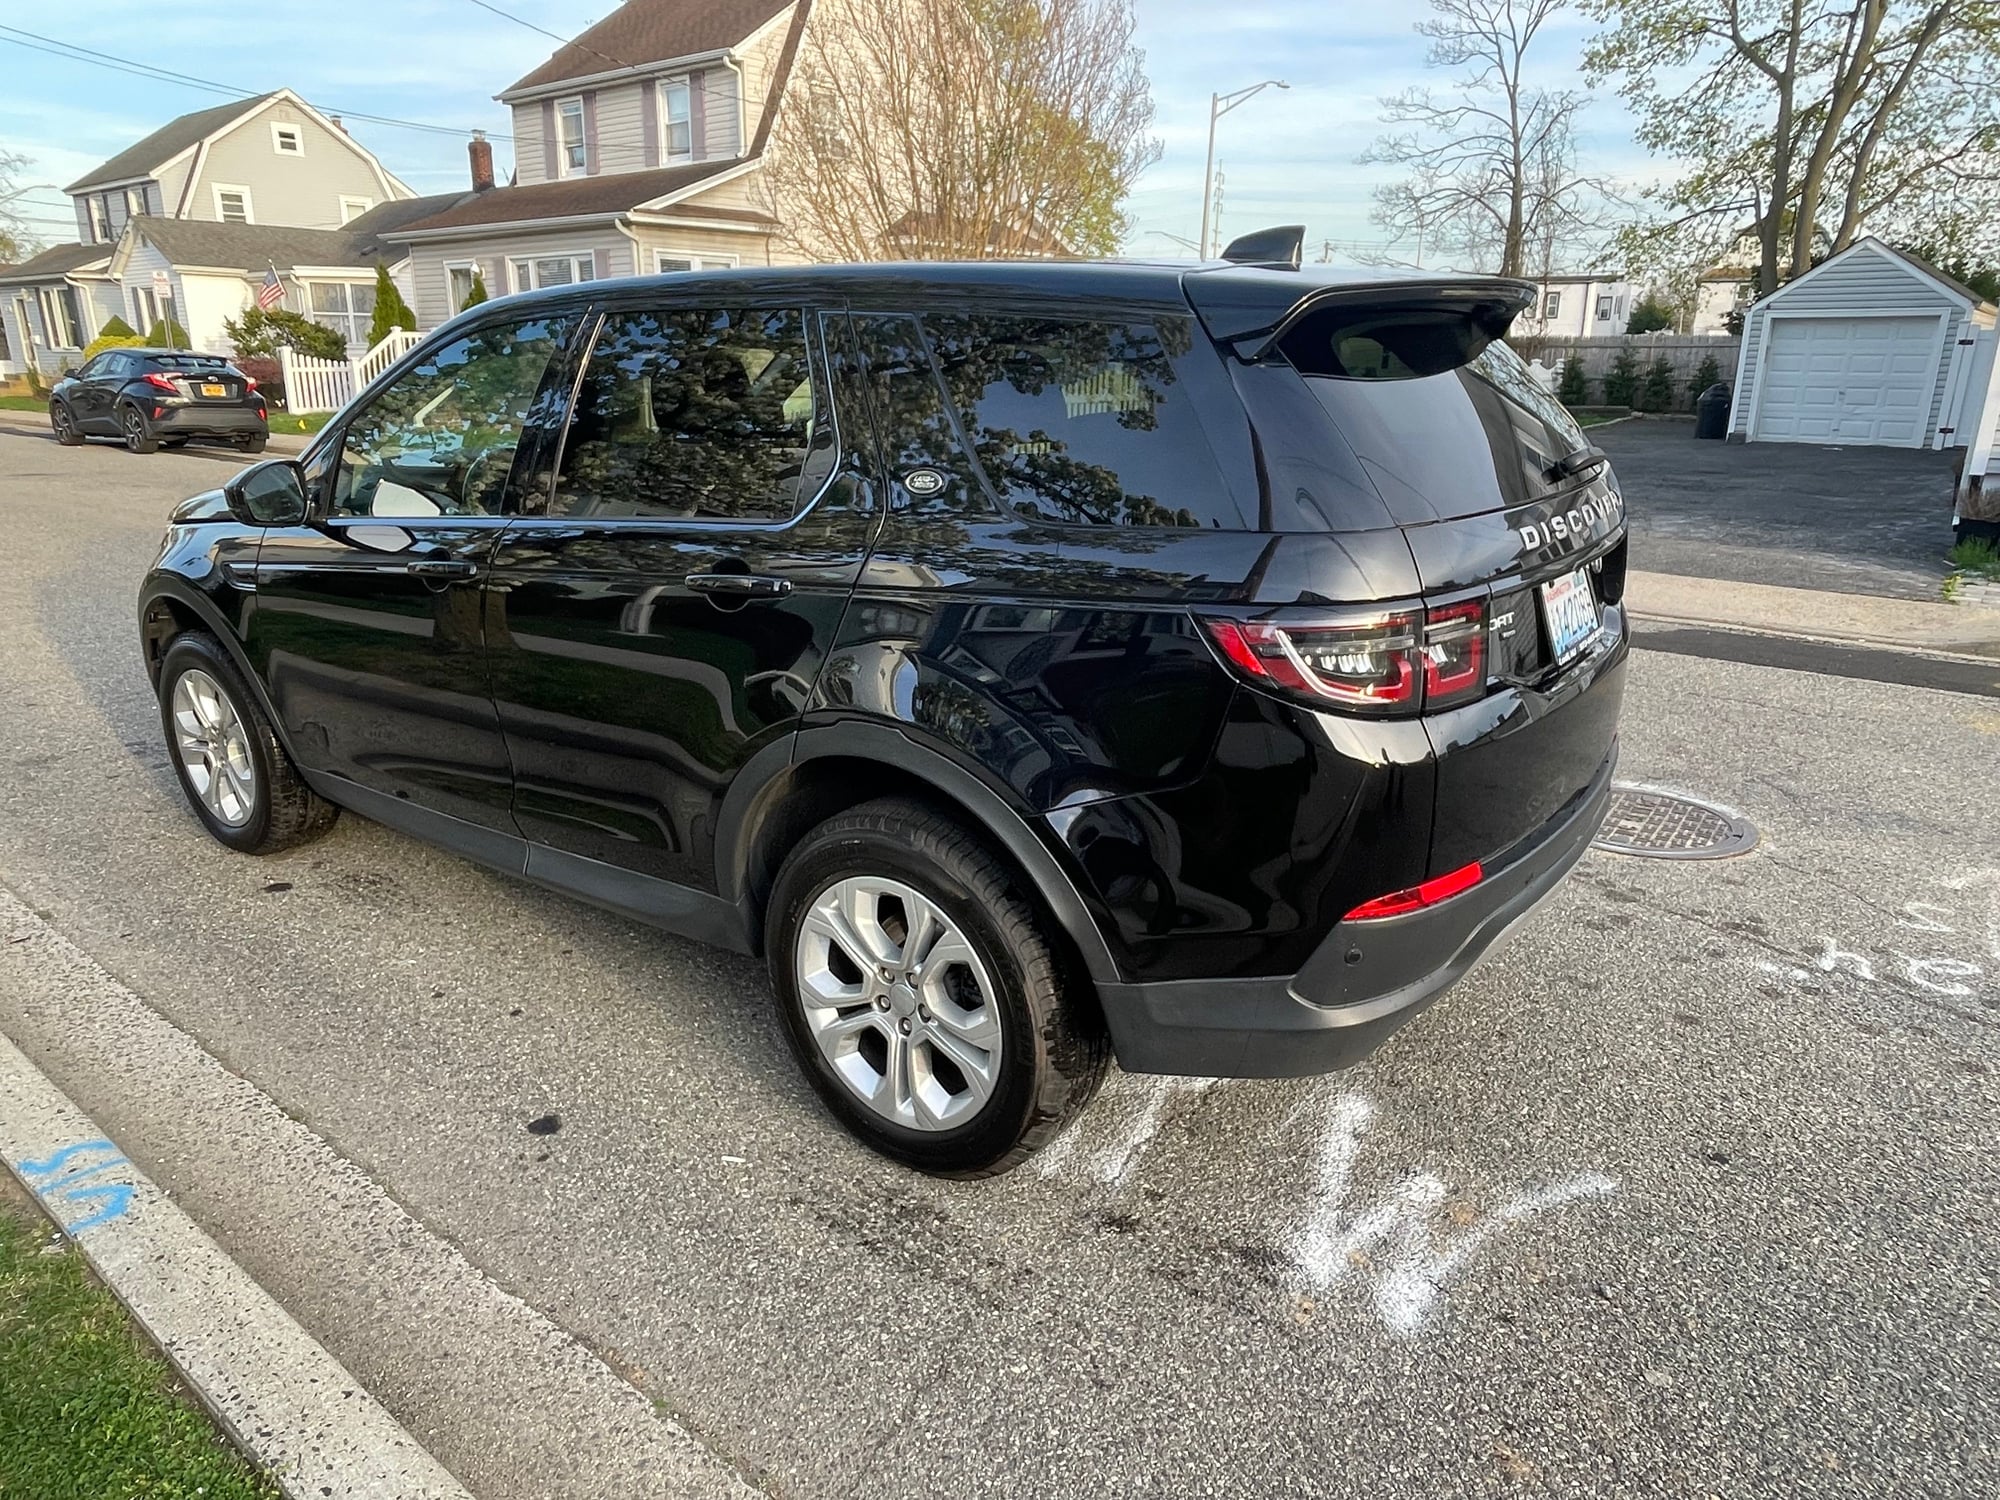 2020 Land Rover Discovery Sport - 2020 discovery sport p250 - Used - VIN SALCK2FXXLH864270 - 34,000 Miles - 4 cyl - 4WD - Automatic - SUV - Black - Freeport, NY 11735, United States